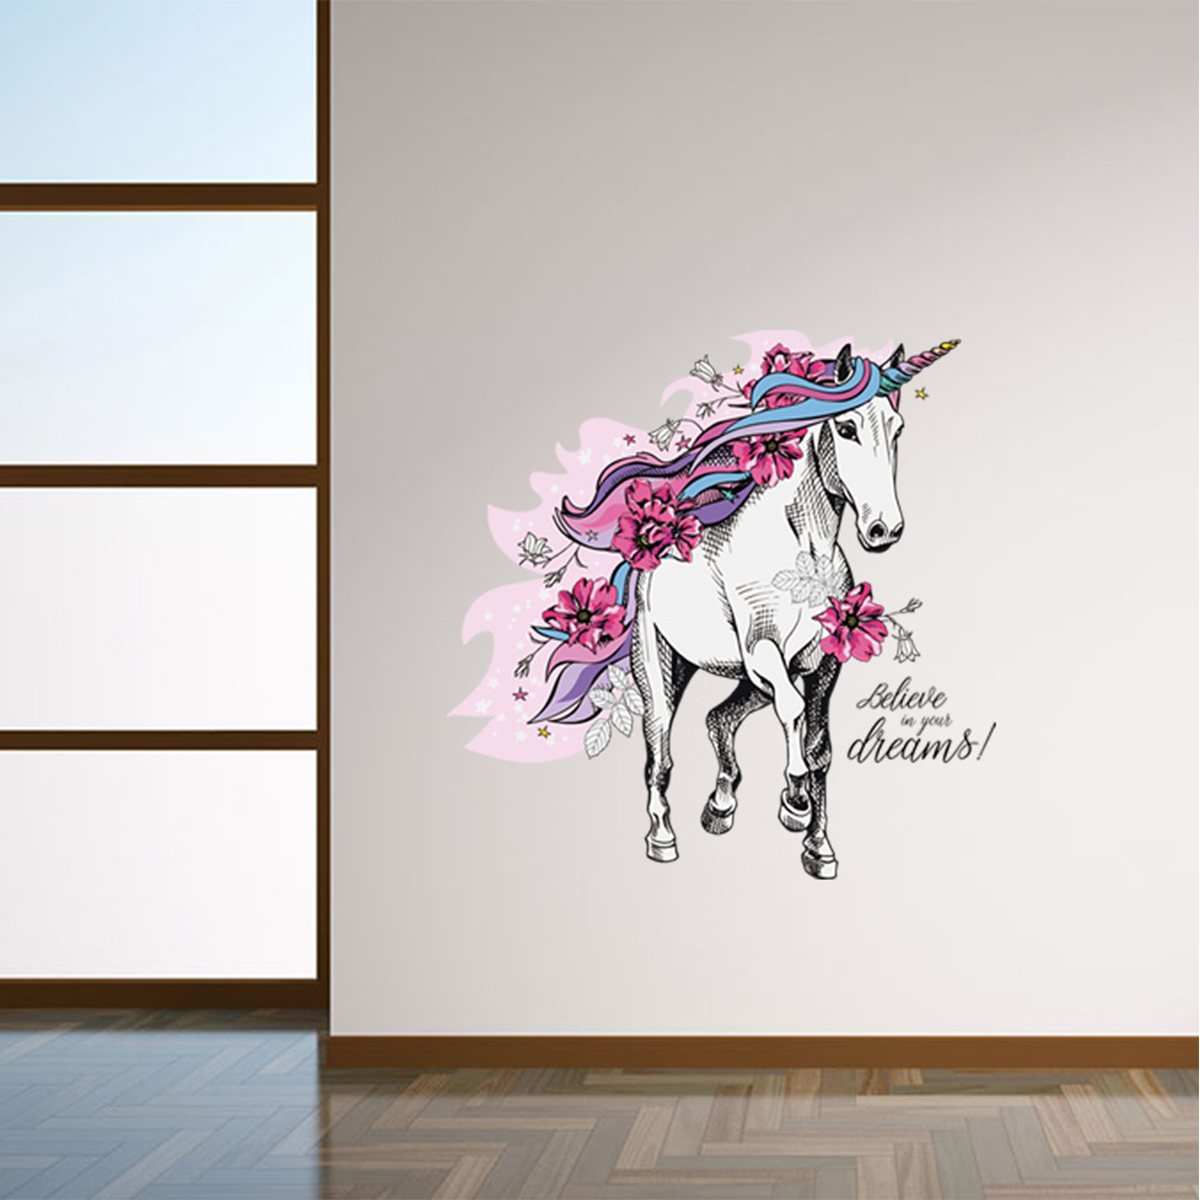 Magical-Running-Horse-Removable-PVC-Wall-Sticker-Background-Kids-Bedroom-Decals-1813107-2